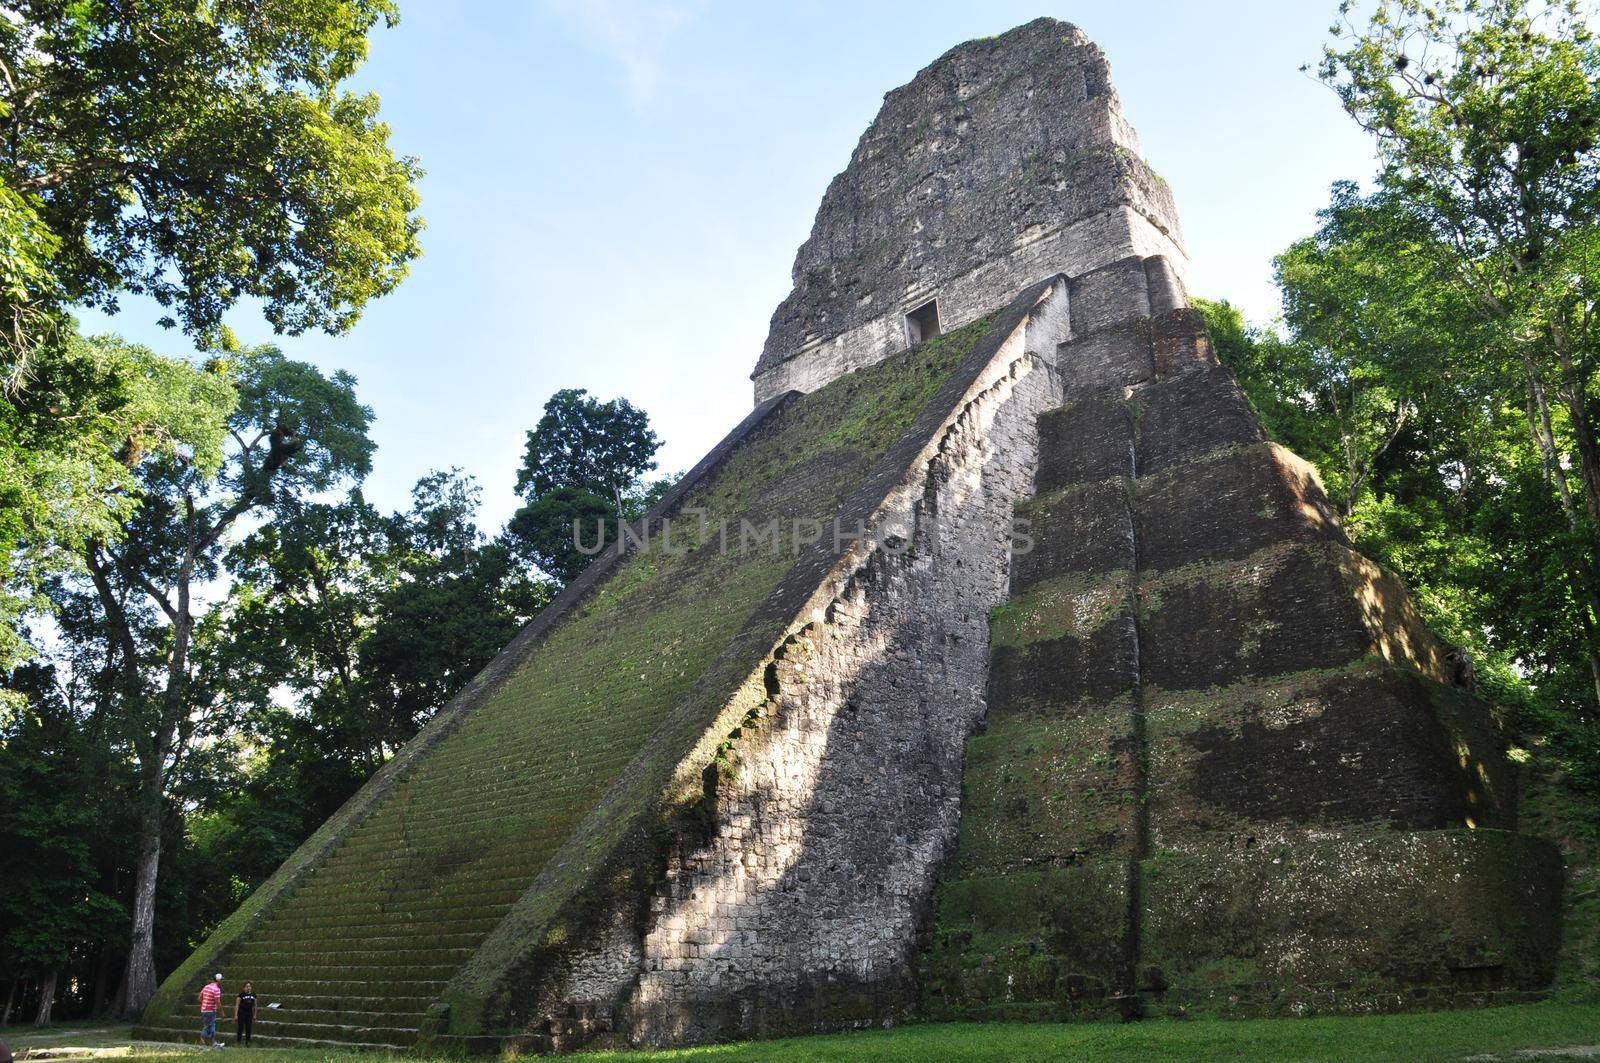 A temple in Tikal National Park, Guatemala by Capos